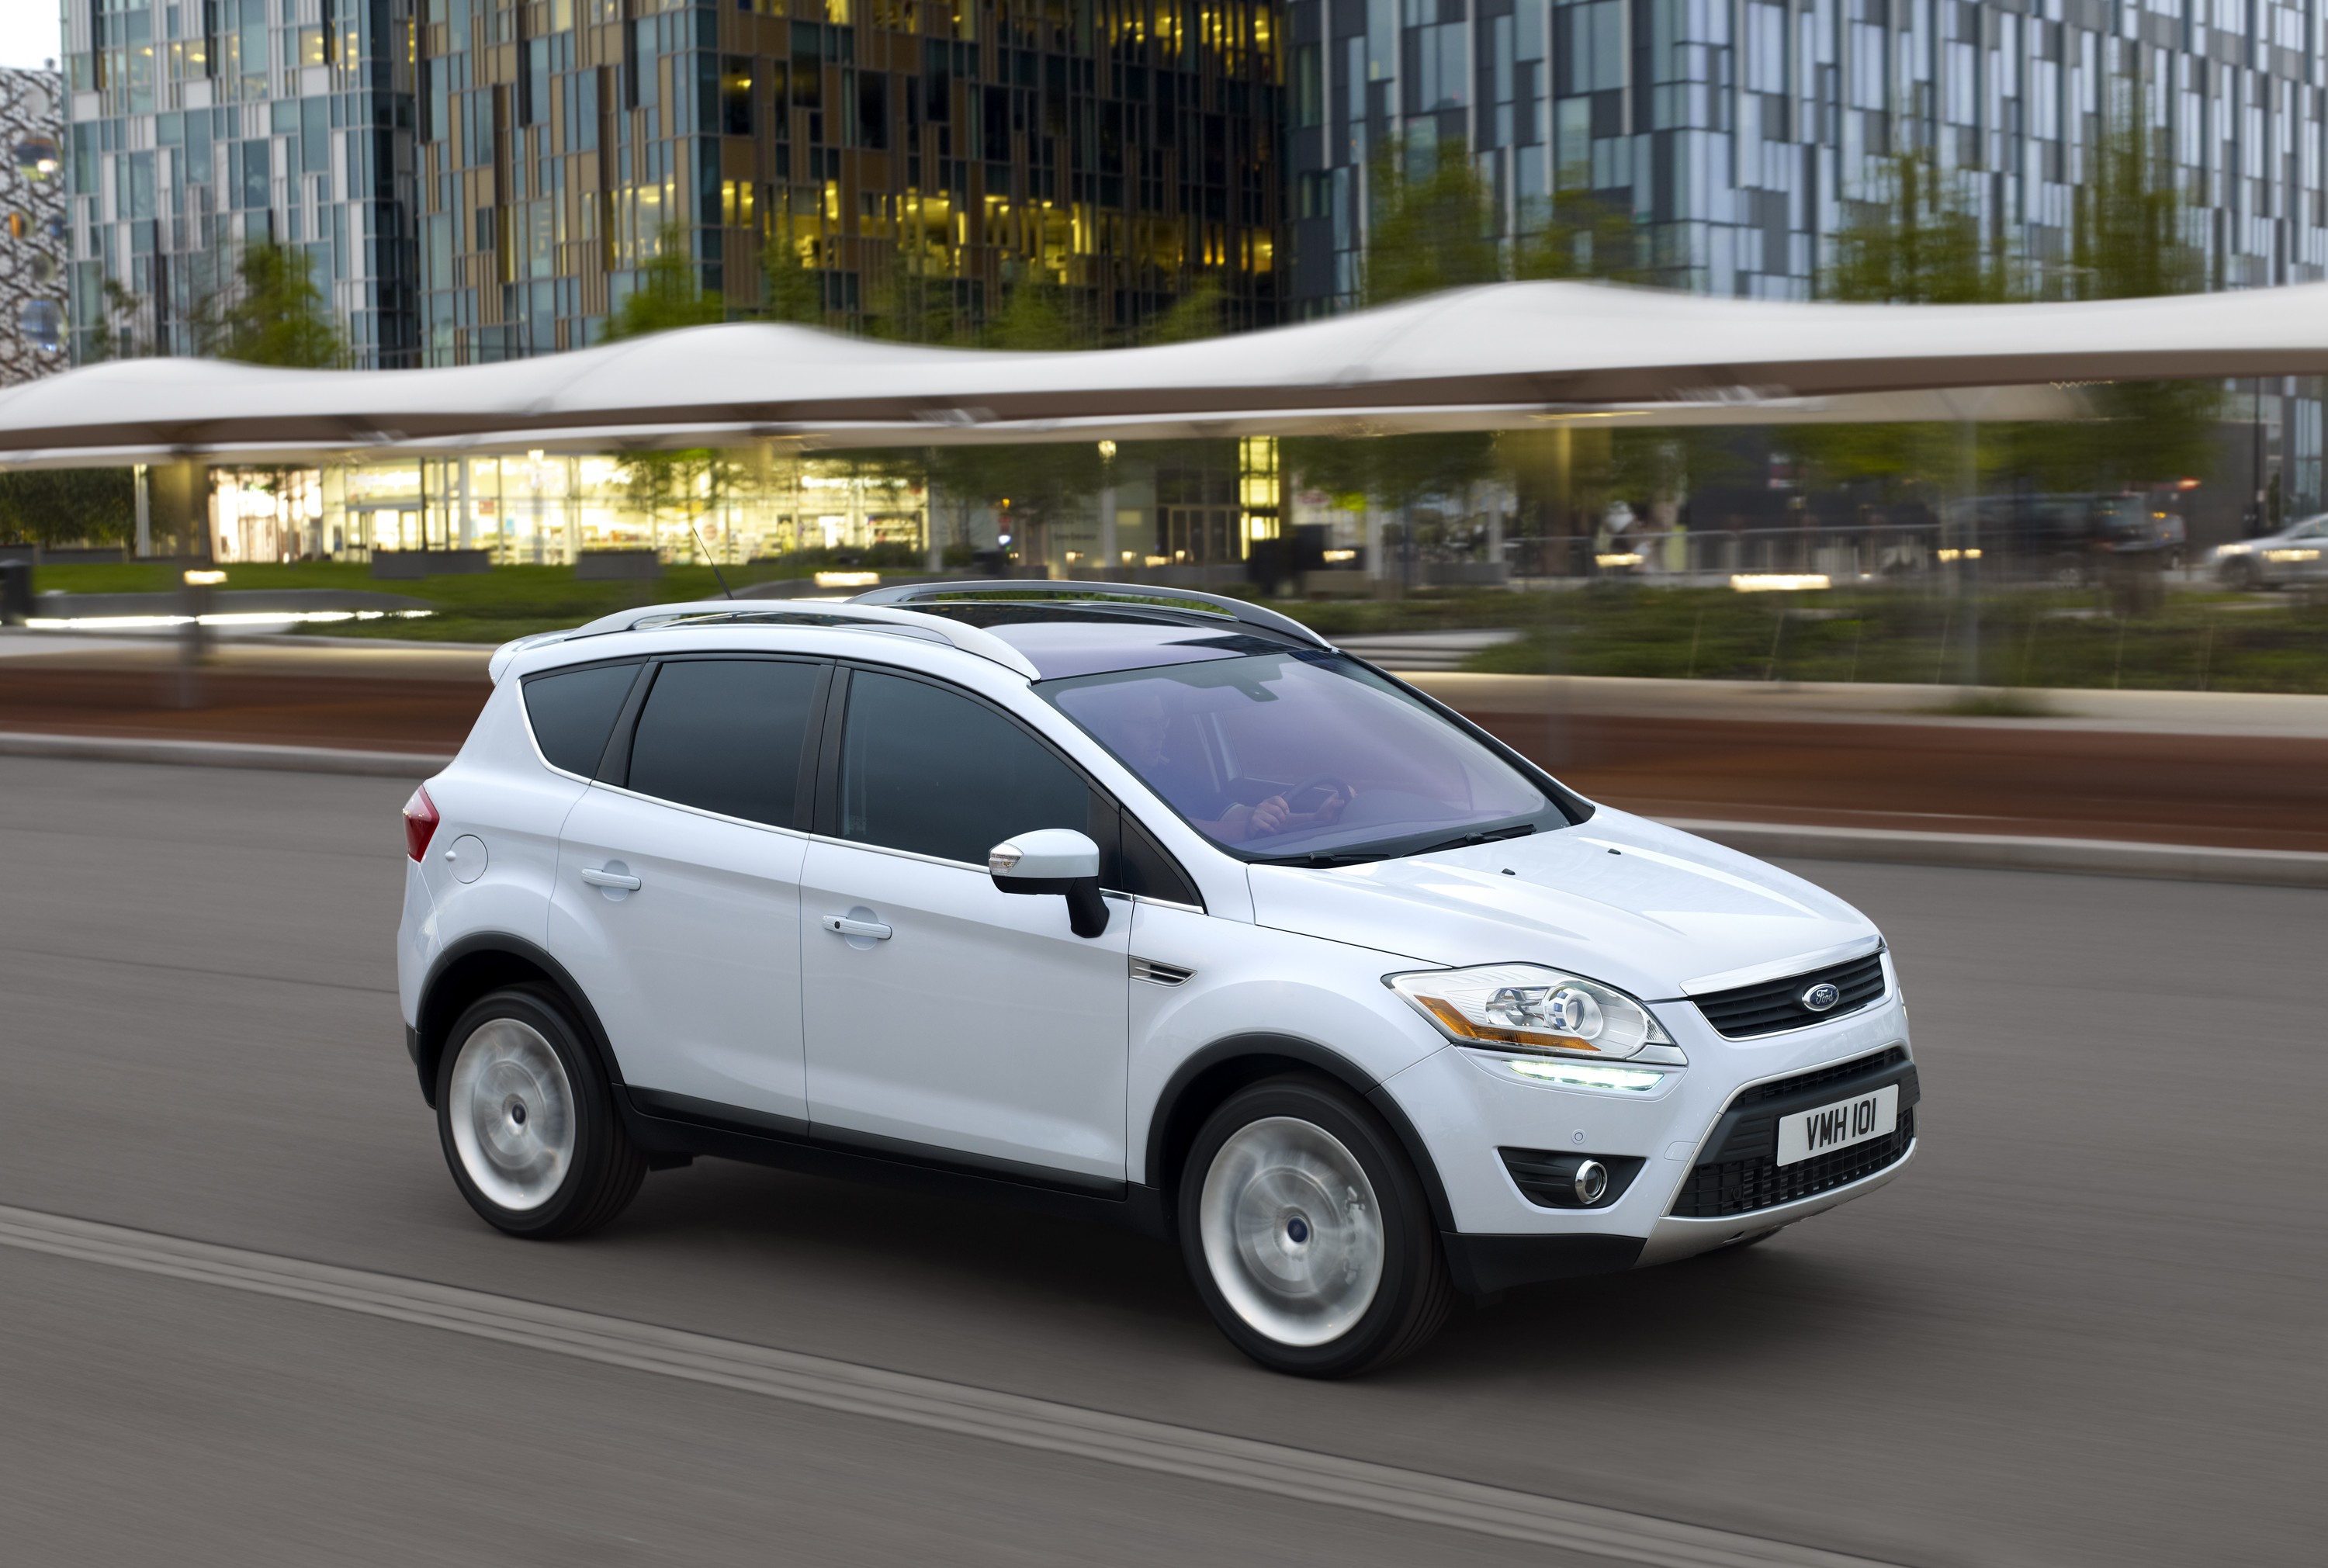 General 3000x2021 car Ford Kuga Ford Escape